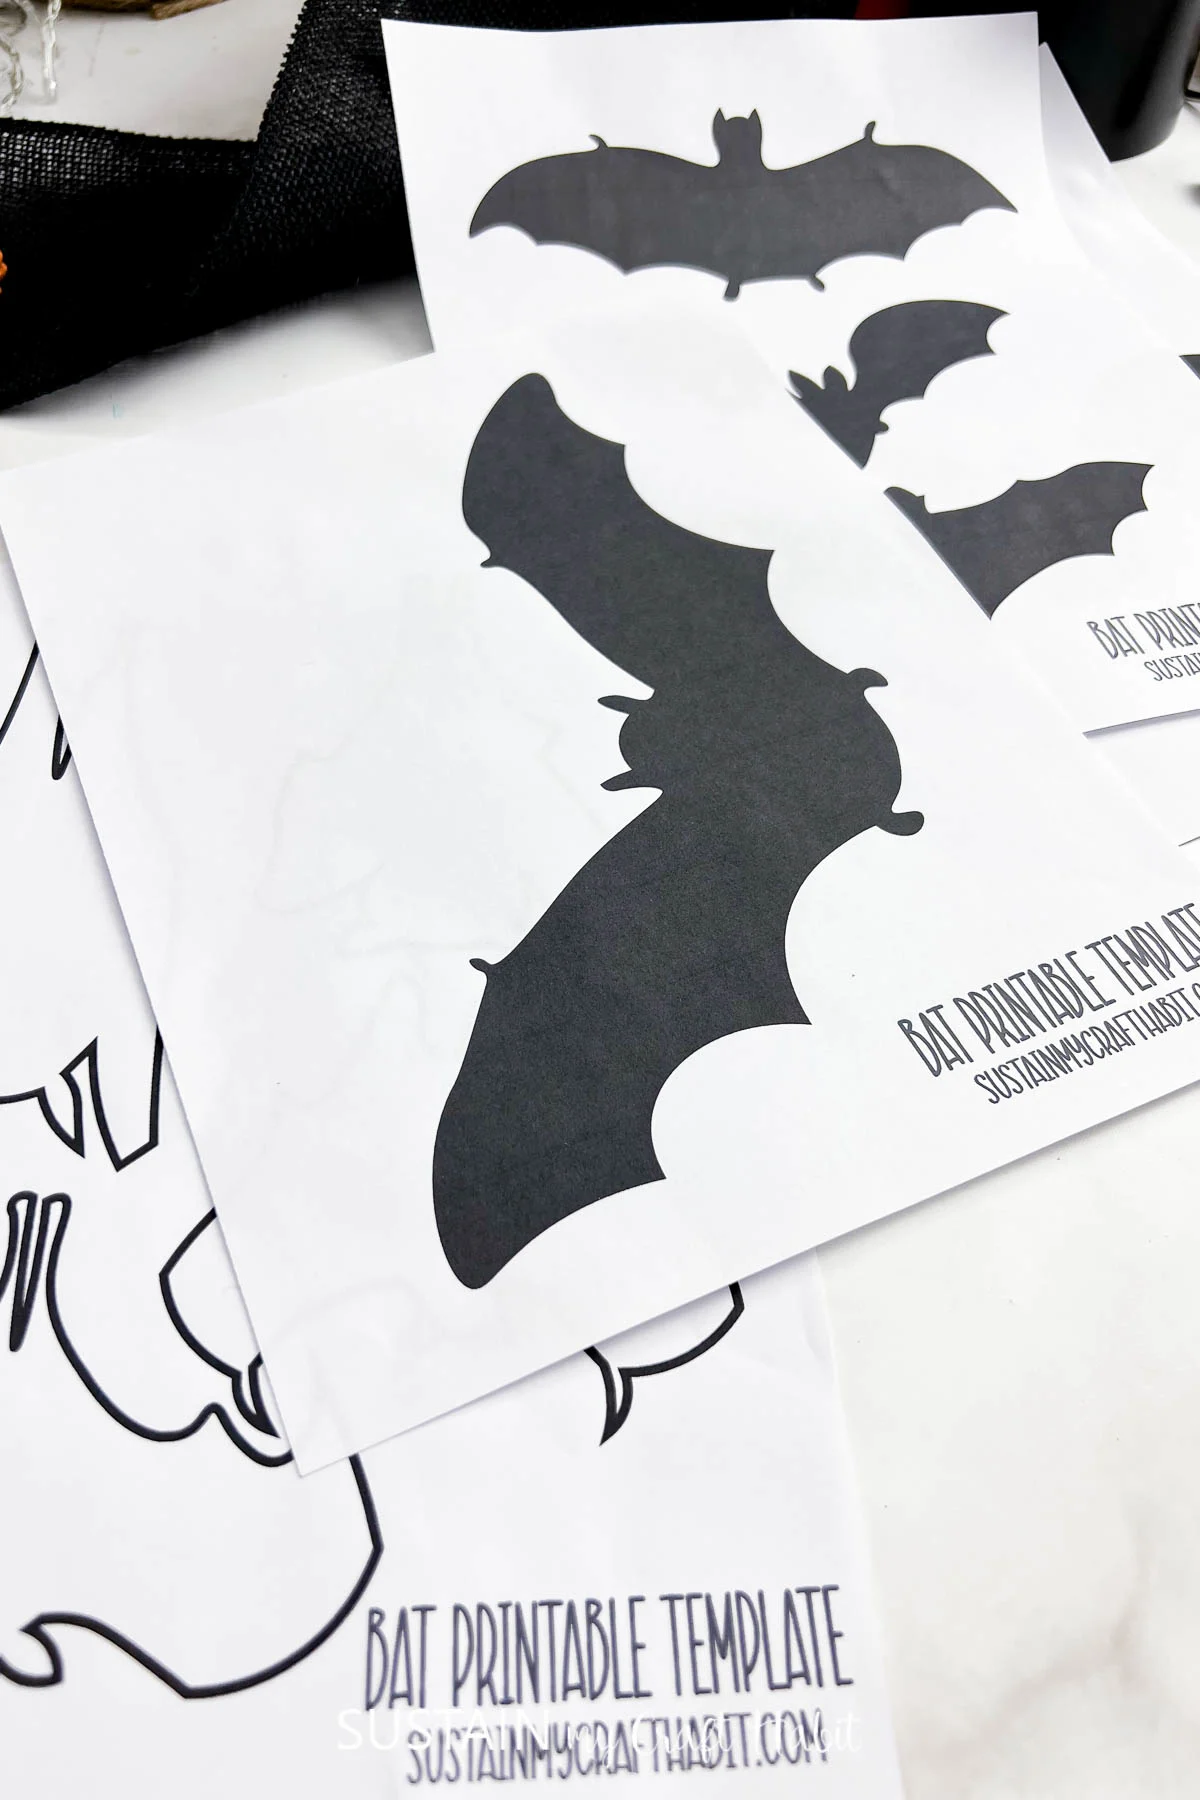 Various printable bat stencils and templates on a white table.